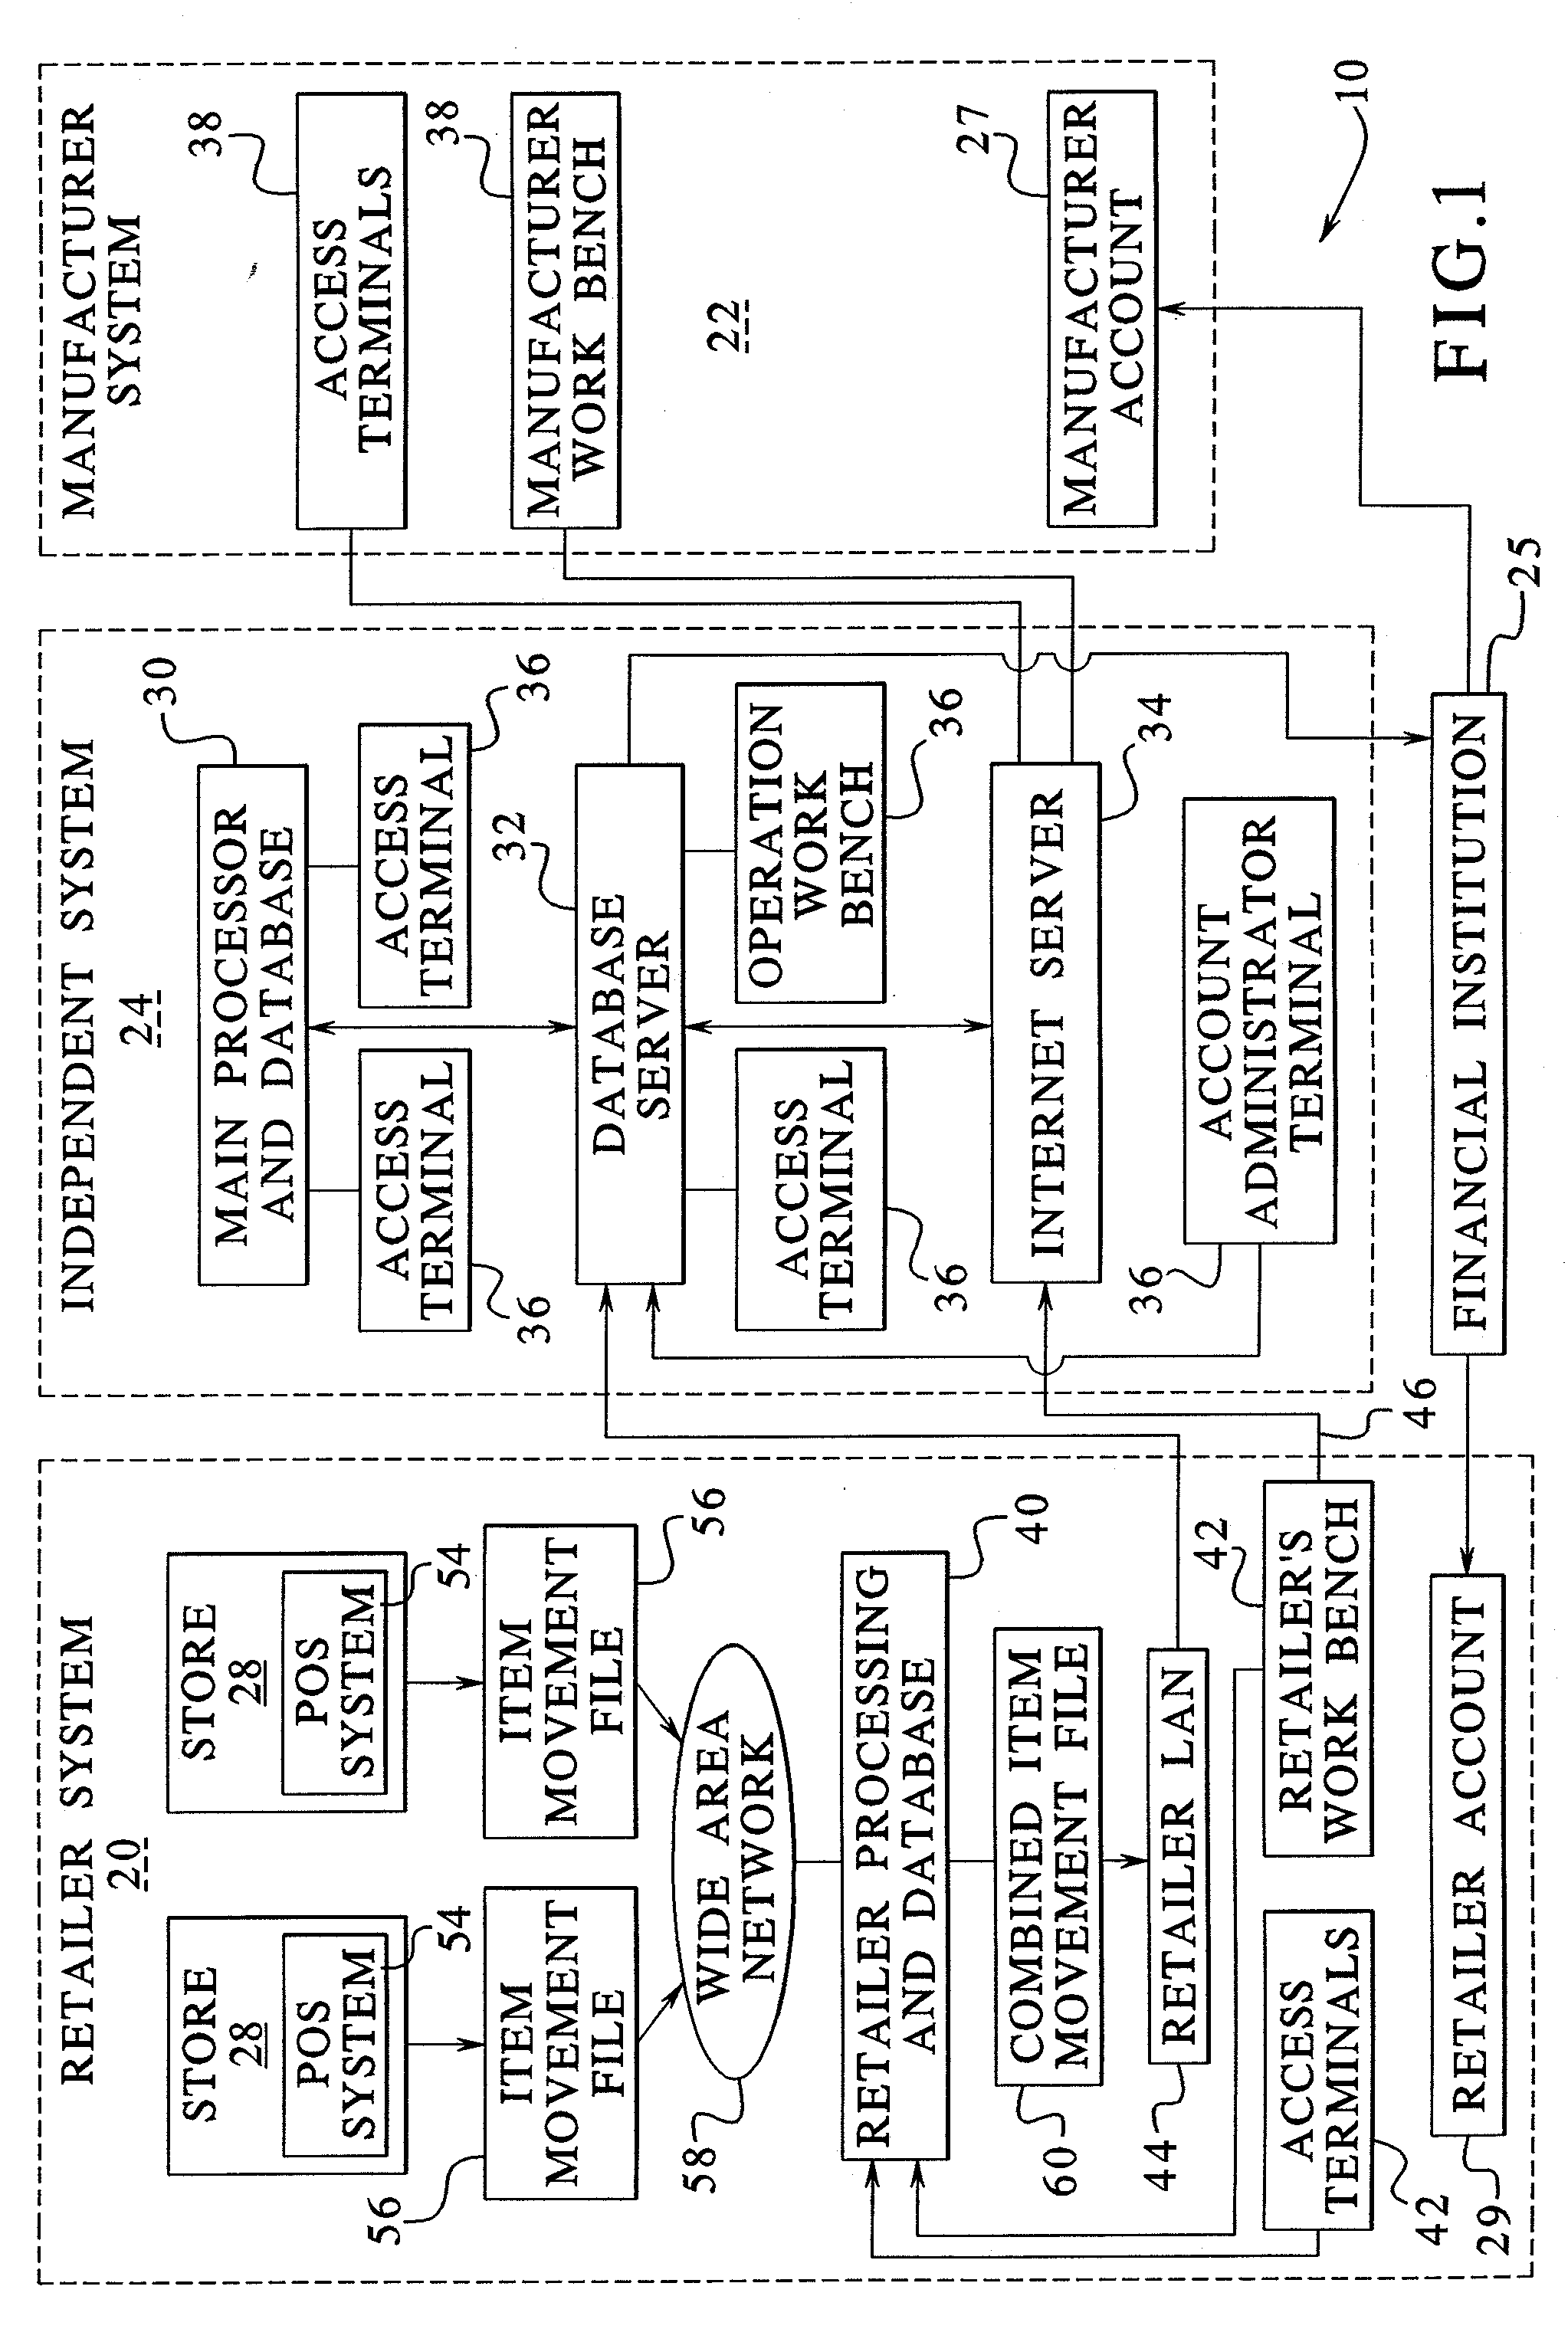 System and method for administering promotions